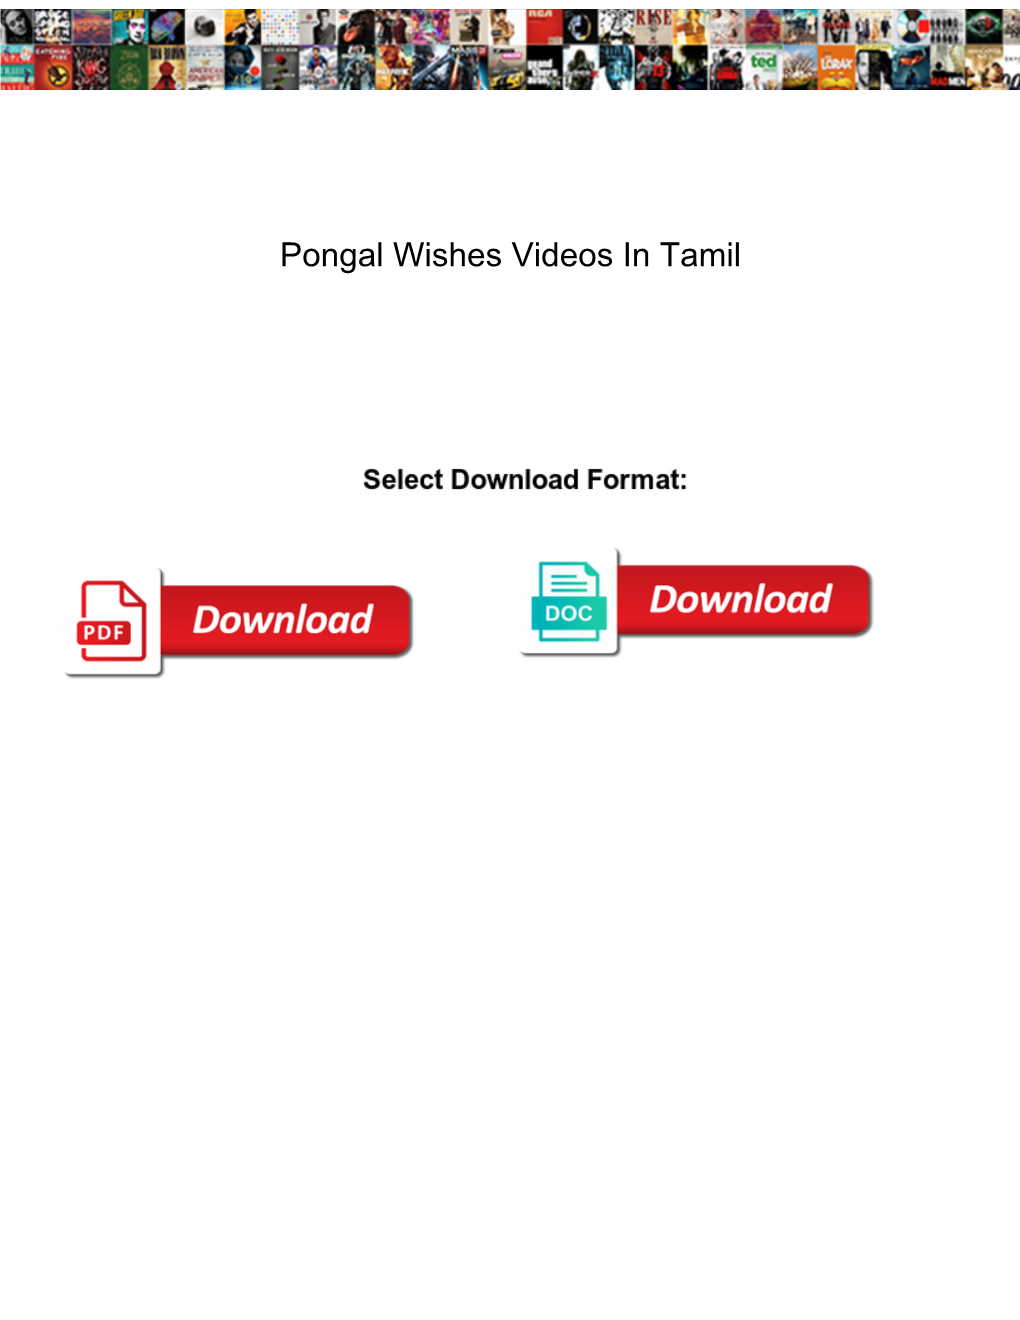 Pongal Wishes Videos in Tamil